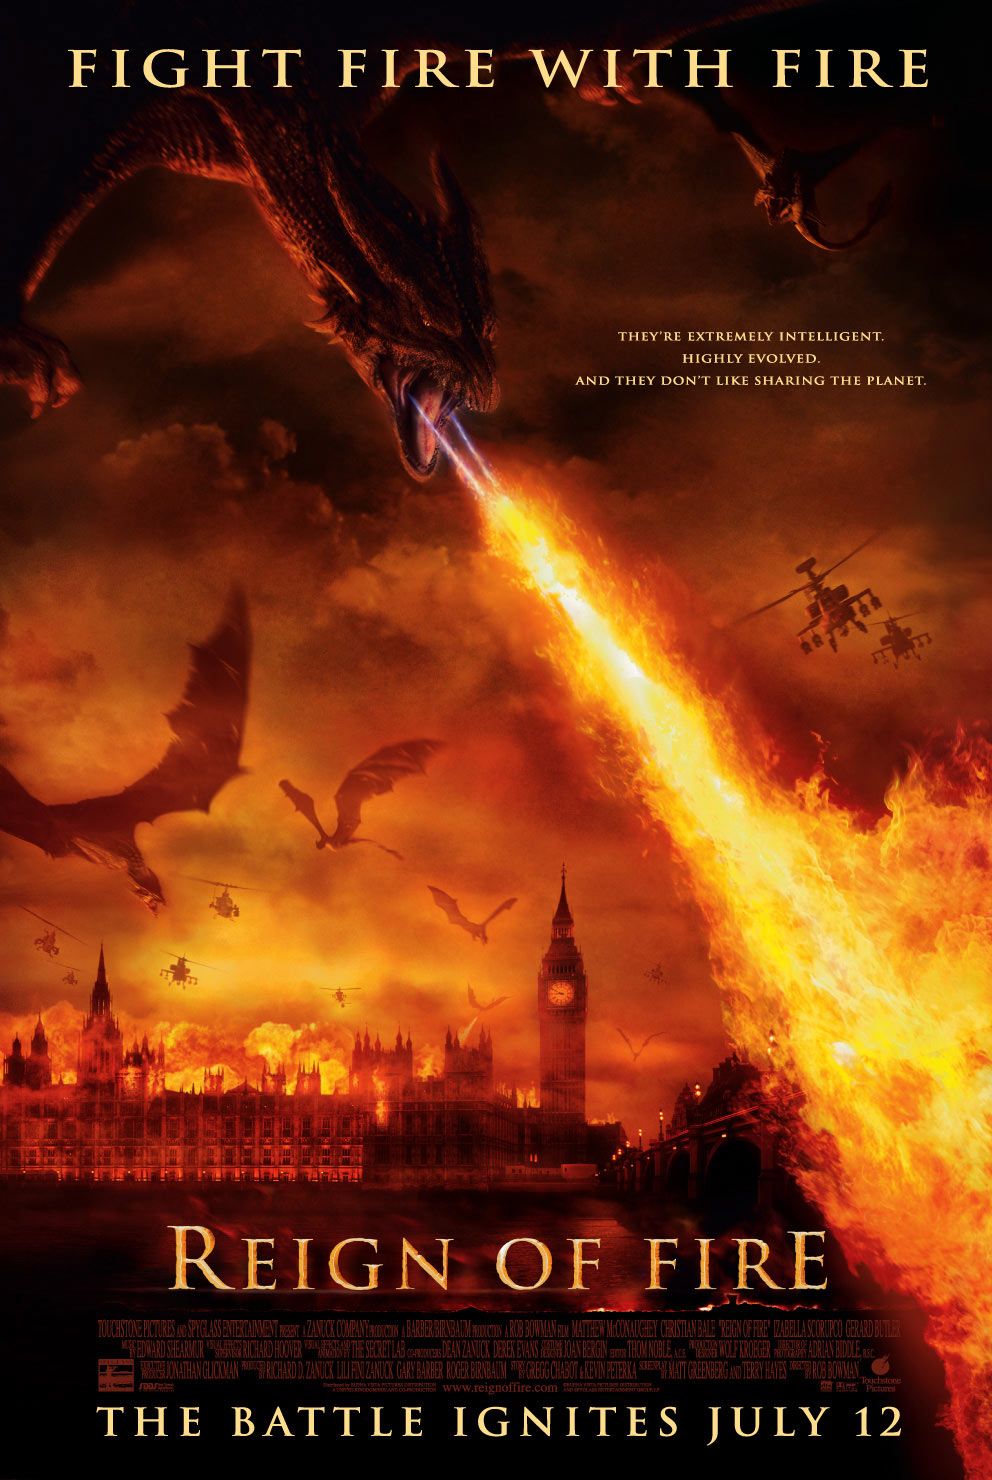 FULL MOVIE: Reign of Fire (2002)